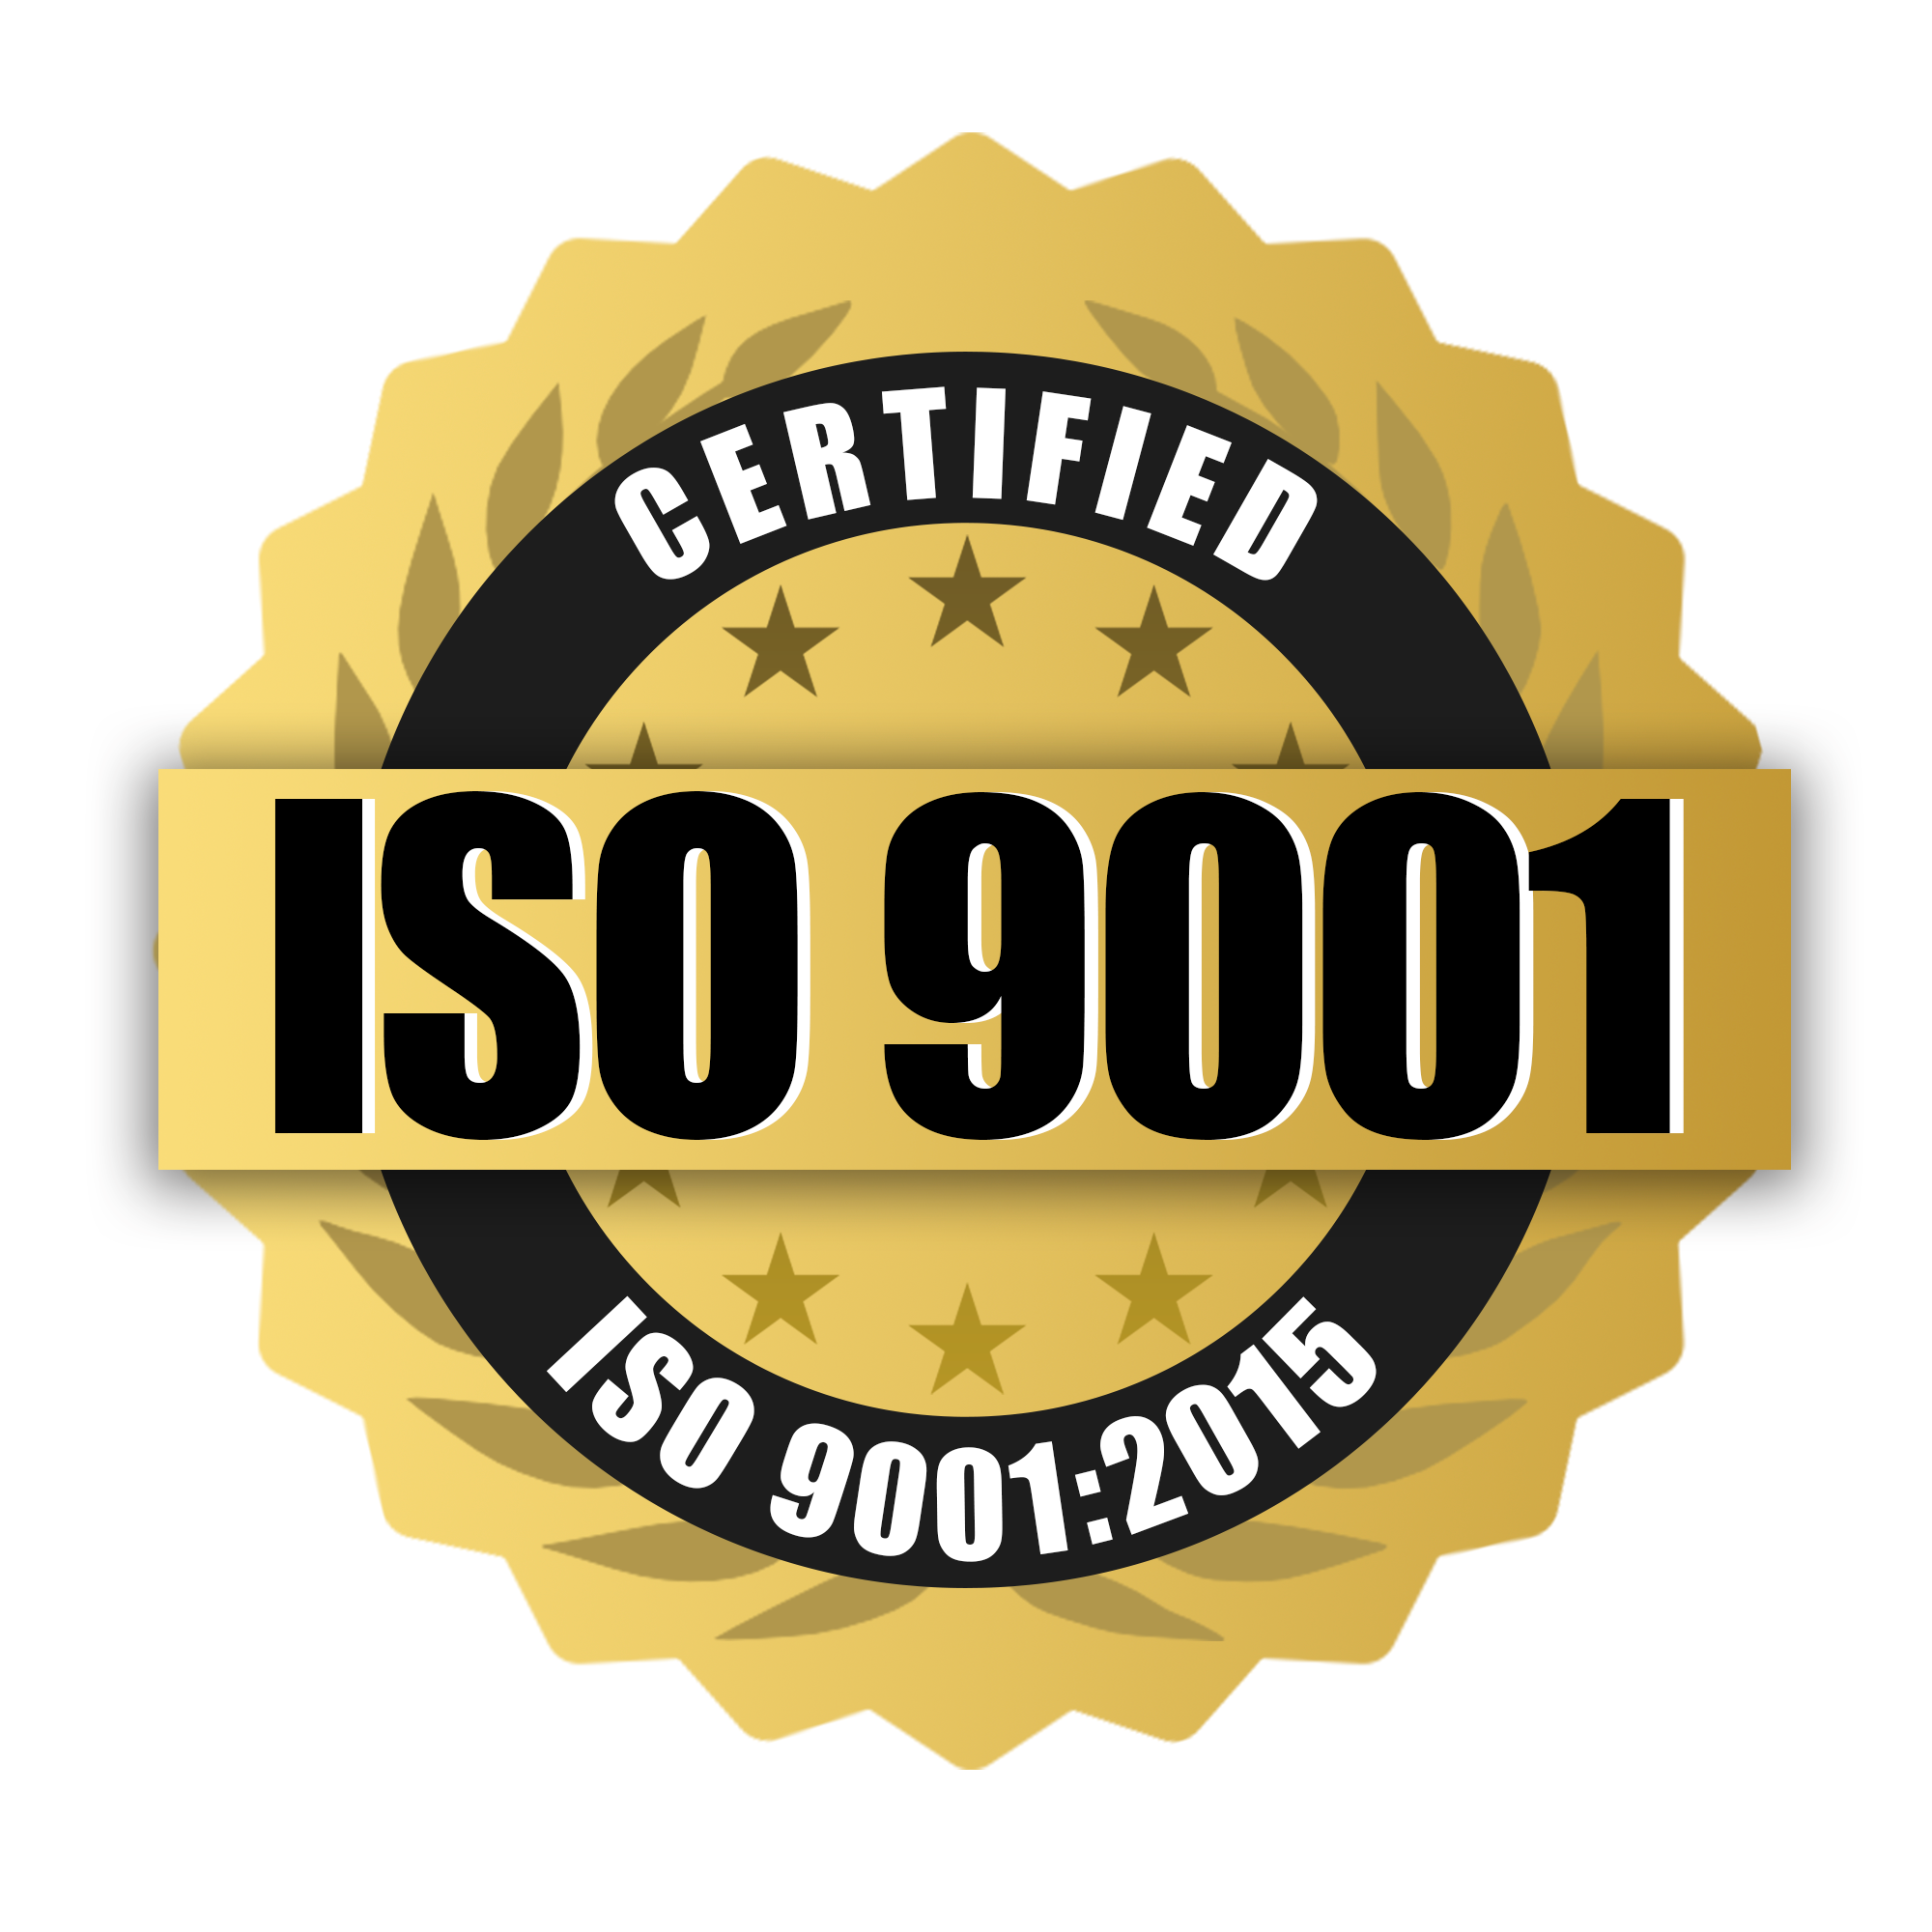 Modality Solutions’ ISO 9001:2015 Quality Management System certification: consulting, design, engineering services and testing for supply chain logistics for transport-sensitive food & drug products.